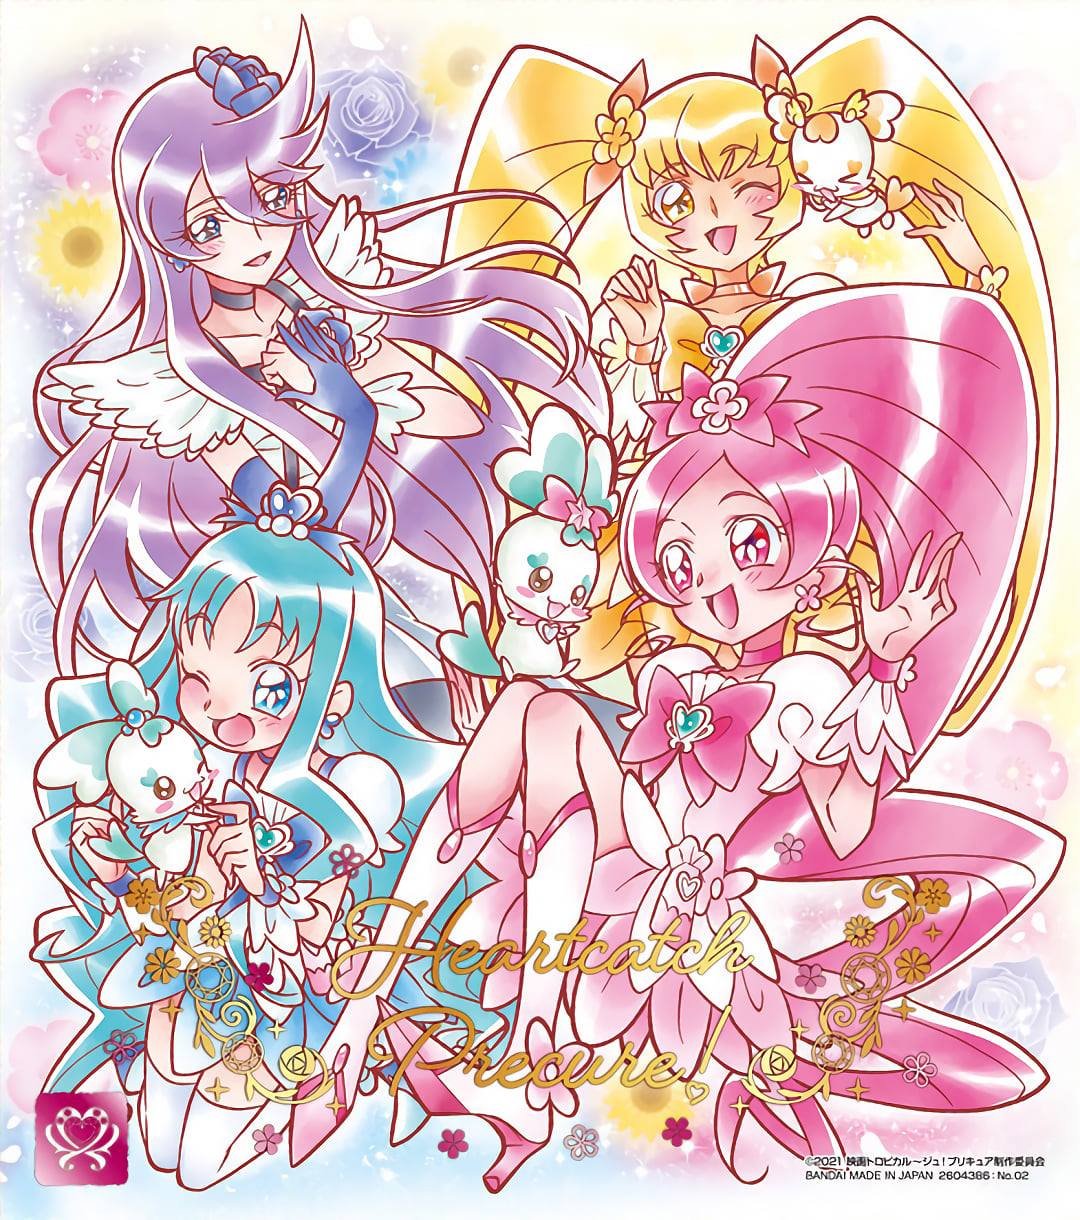 Precure Shikishi Bot On Twitter Heartcatch Pretty Cure 🌷 And Chypre And Coffret And Potpourri